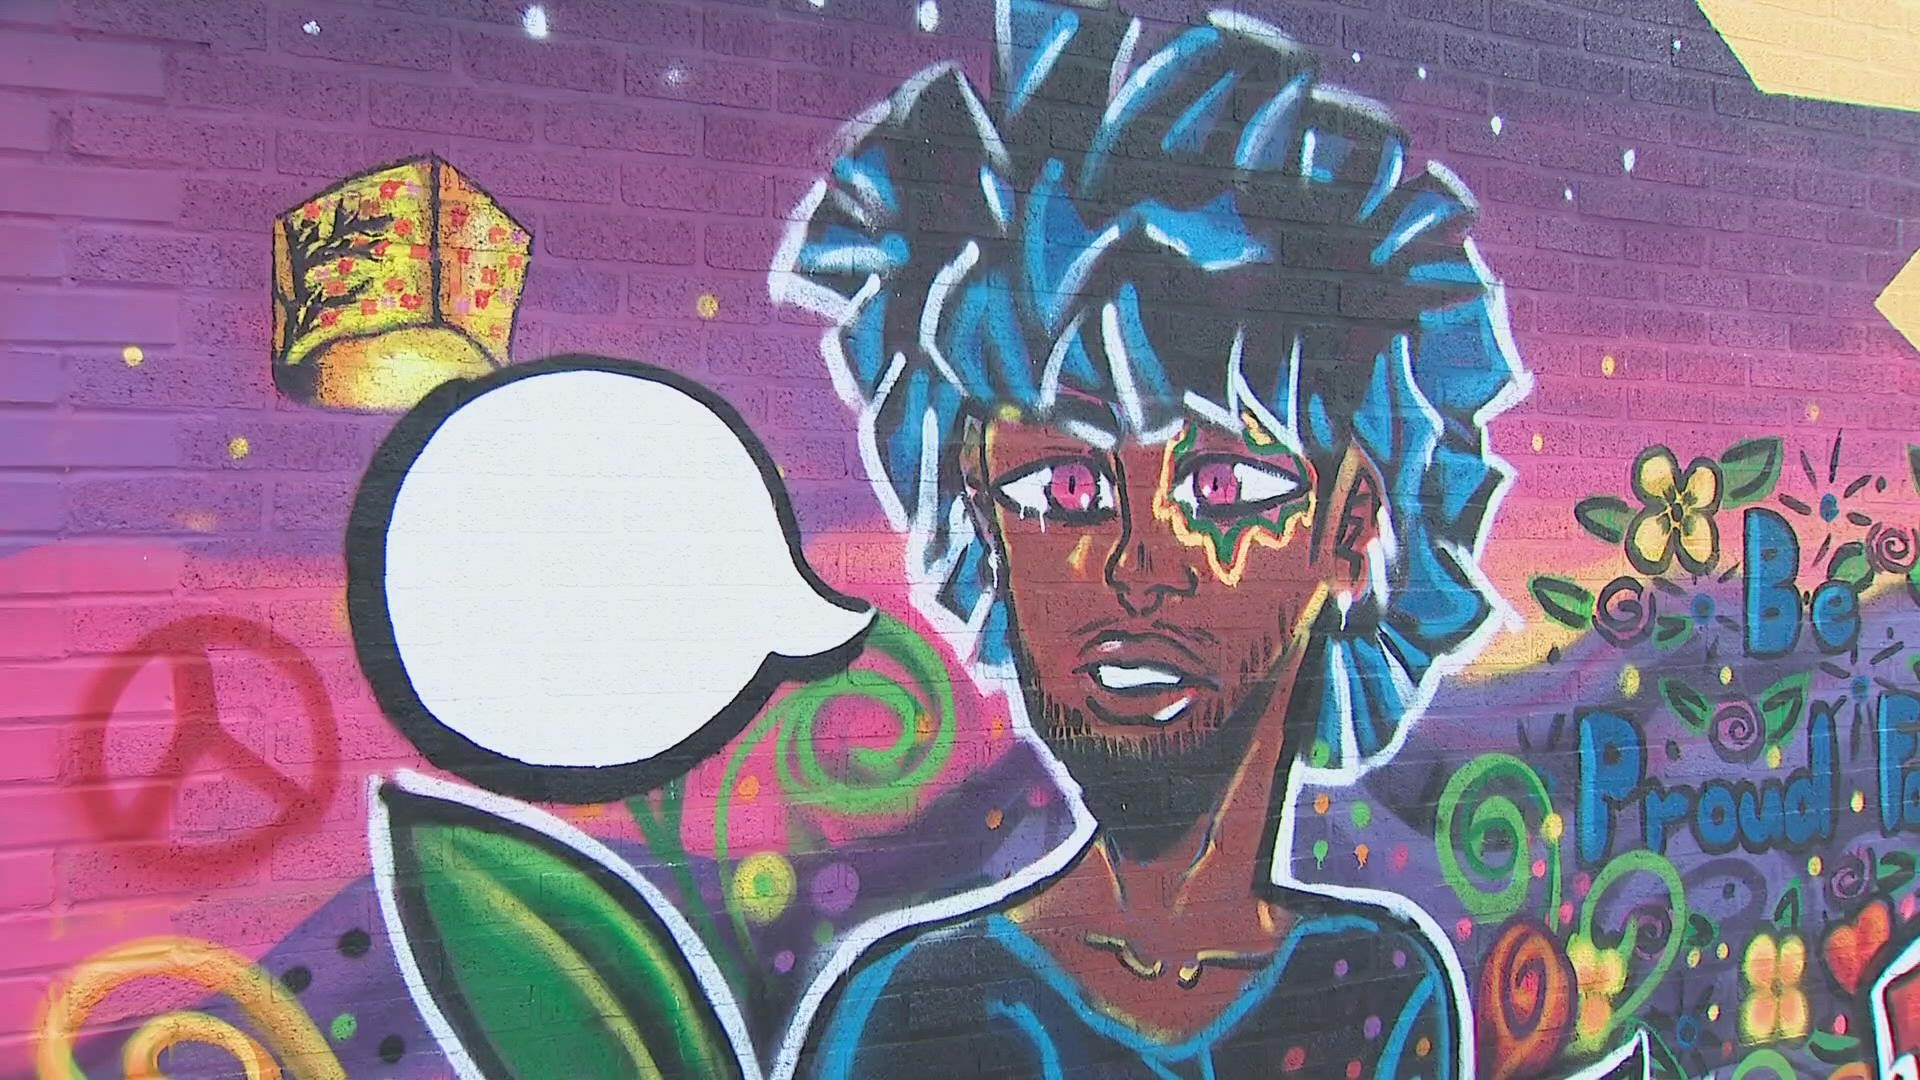 The mural was a part of Ohio State's Linden Empowerment Murals but some say it's not exactly what they signed up for.